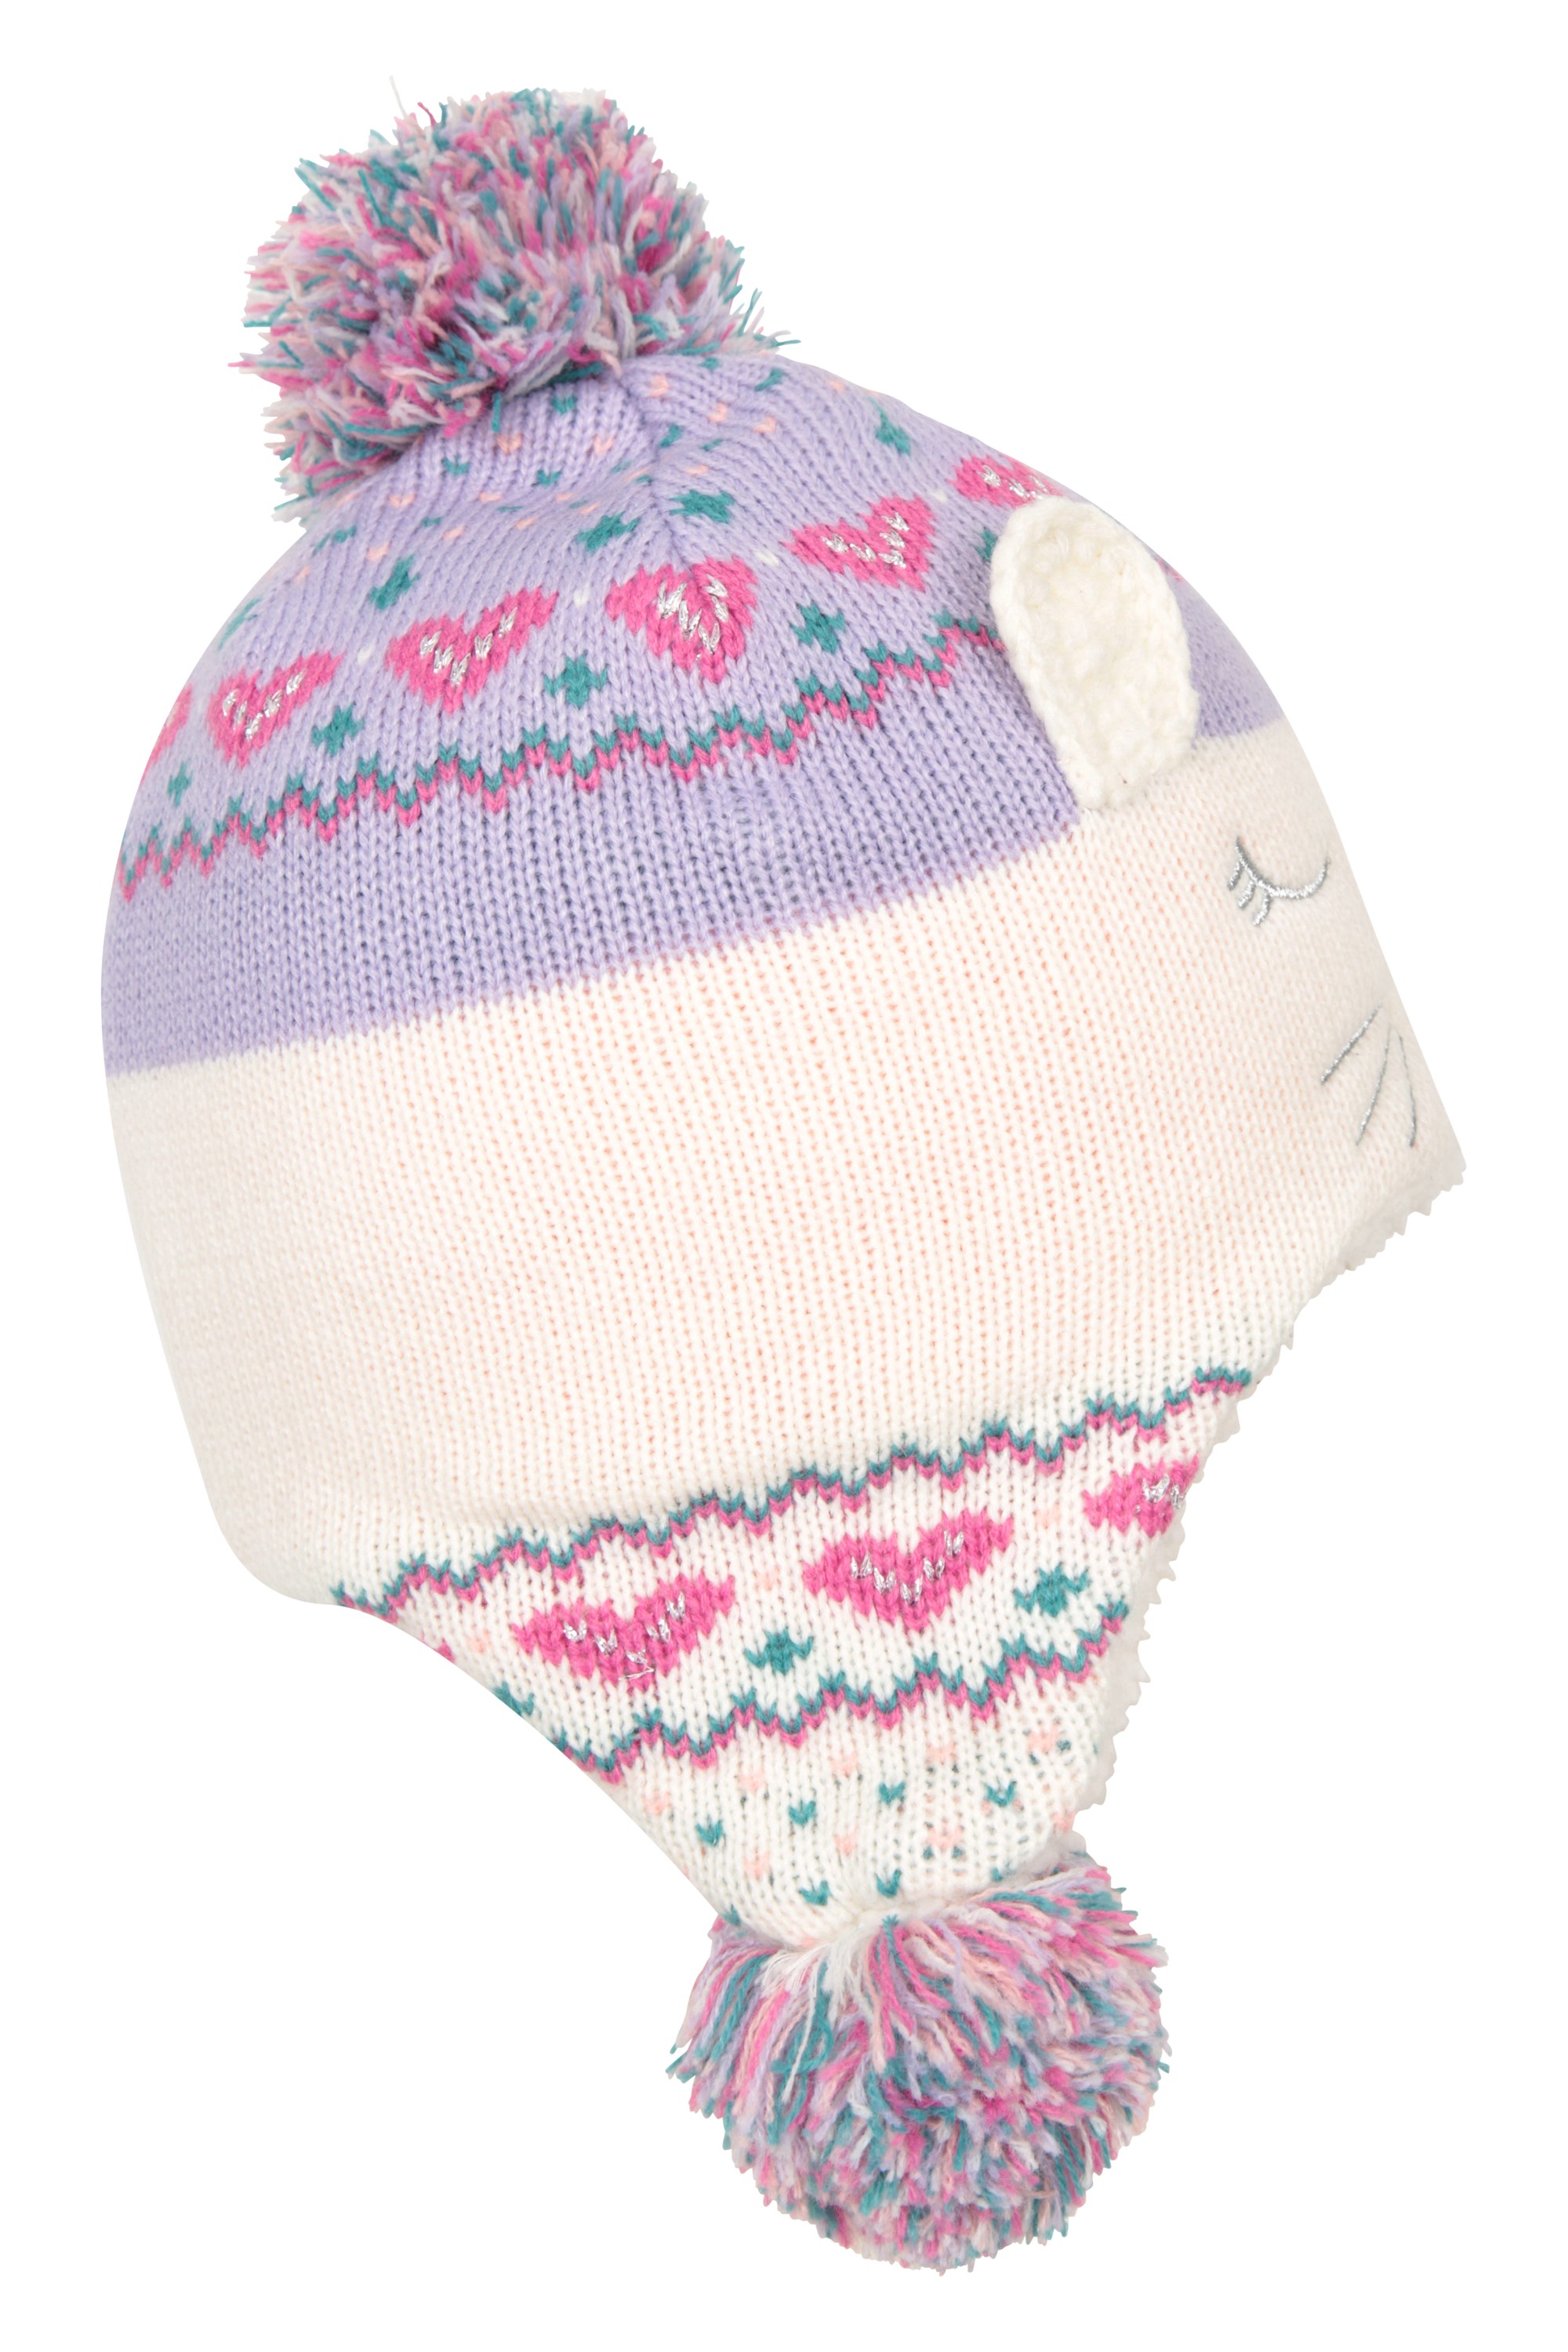 Mountain Warehouse GIRLS BRIGHT PINK BEANIE IMMACULATE CONDITION 